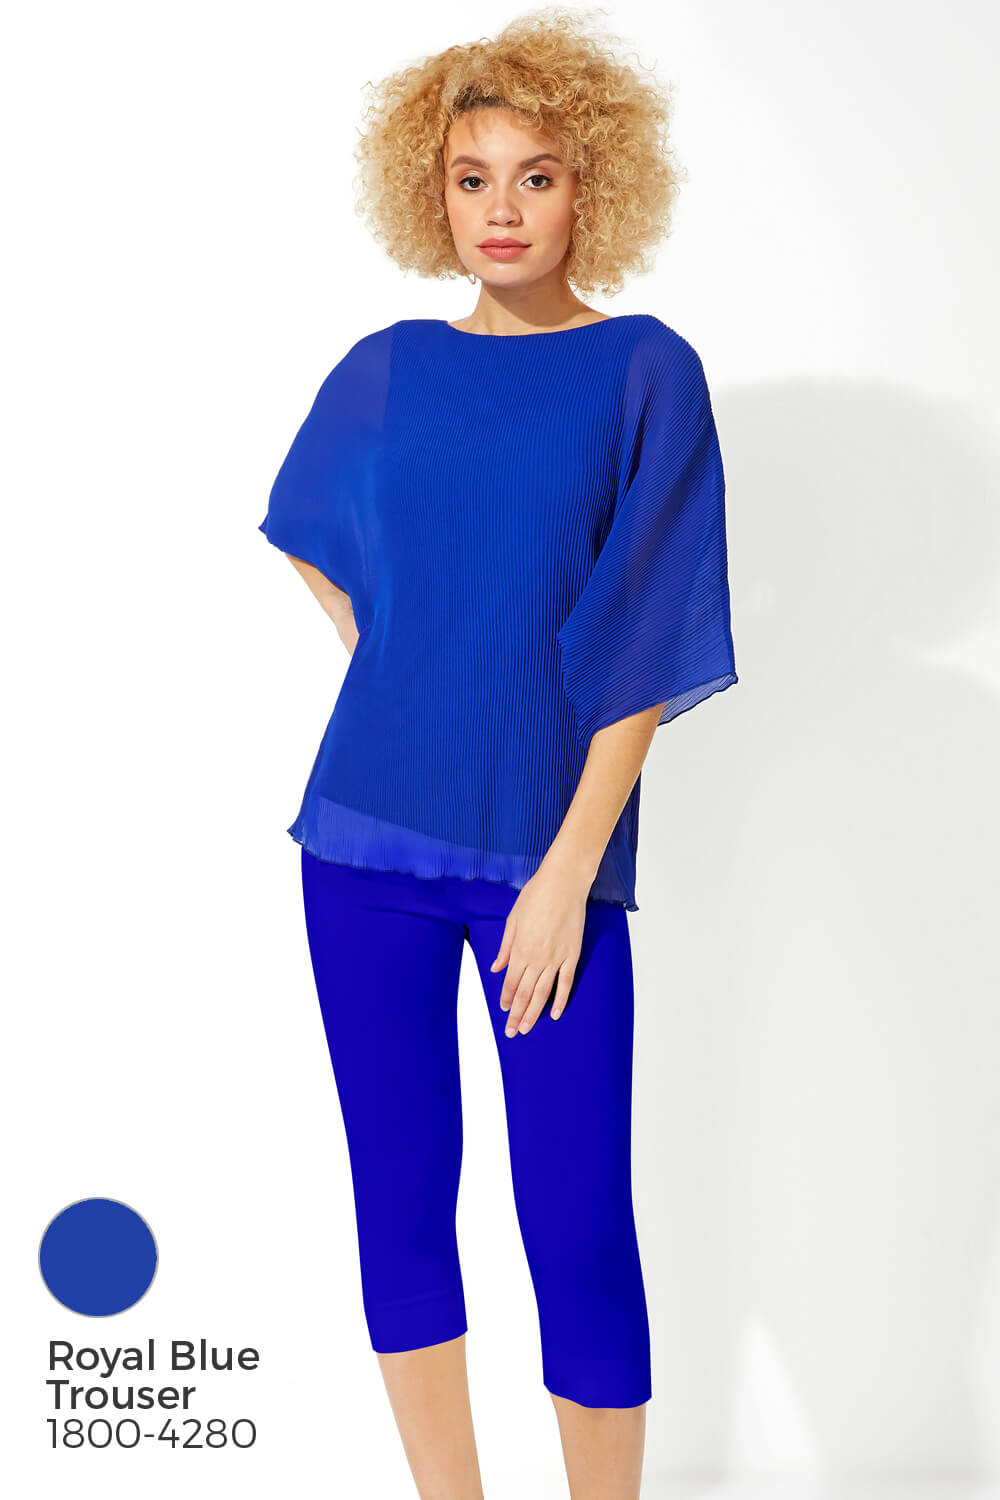 Royal Blue Pleated Chiffon Overlay Top, Image 7 of 8